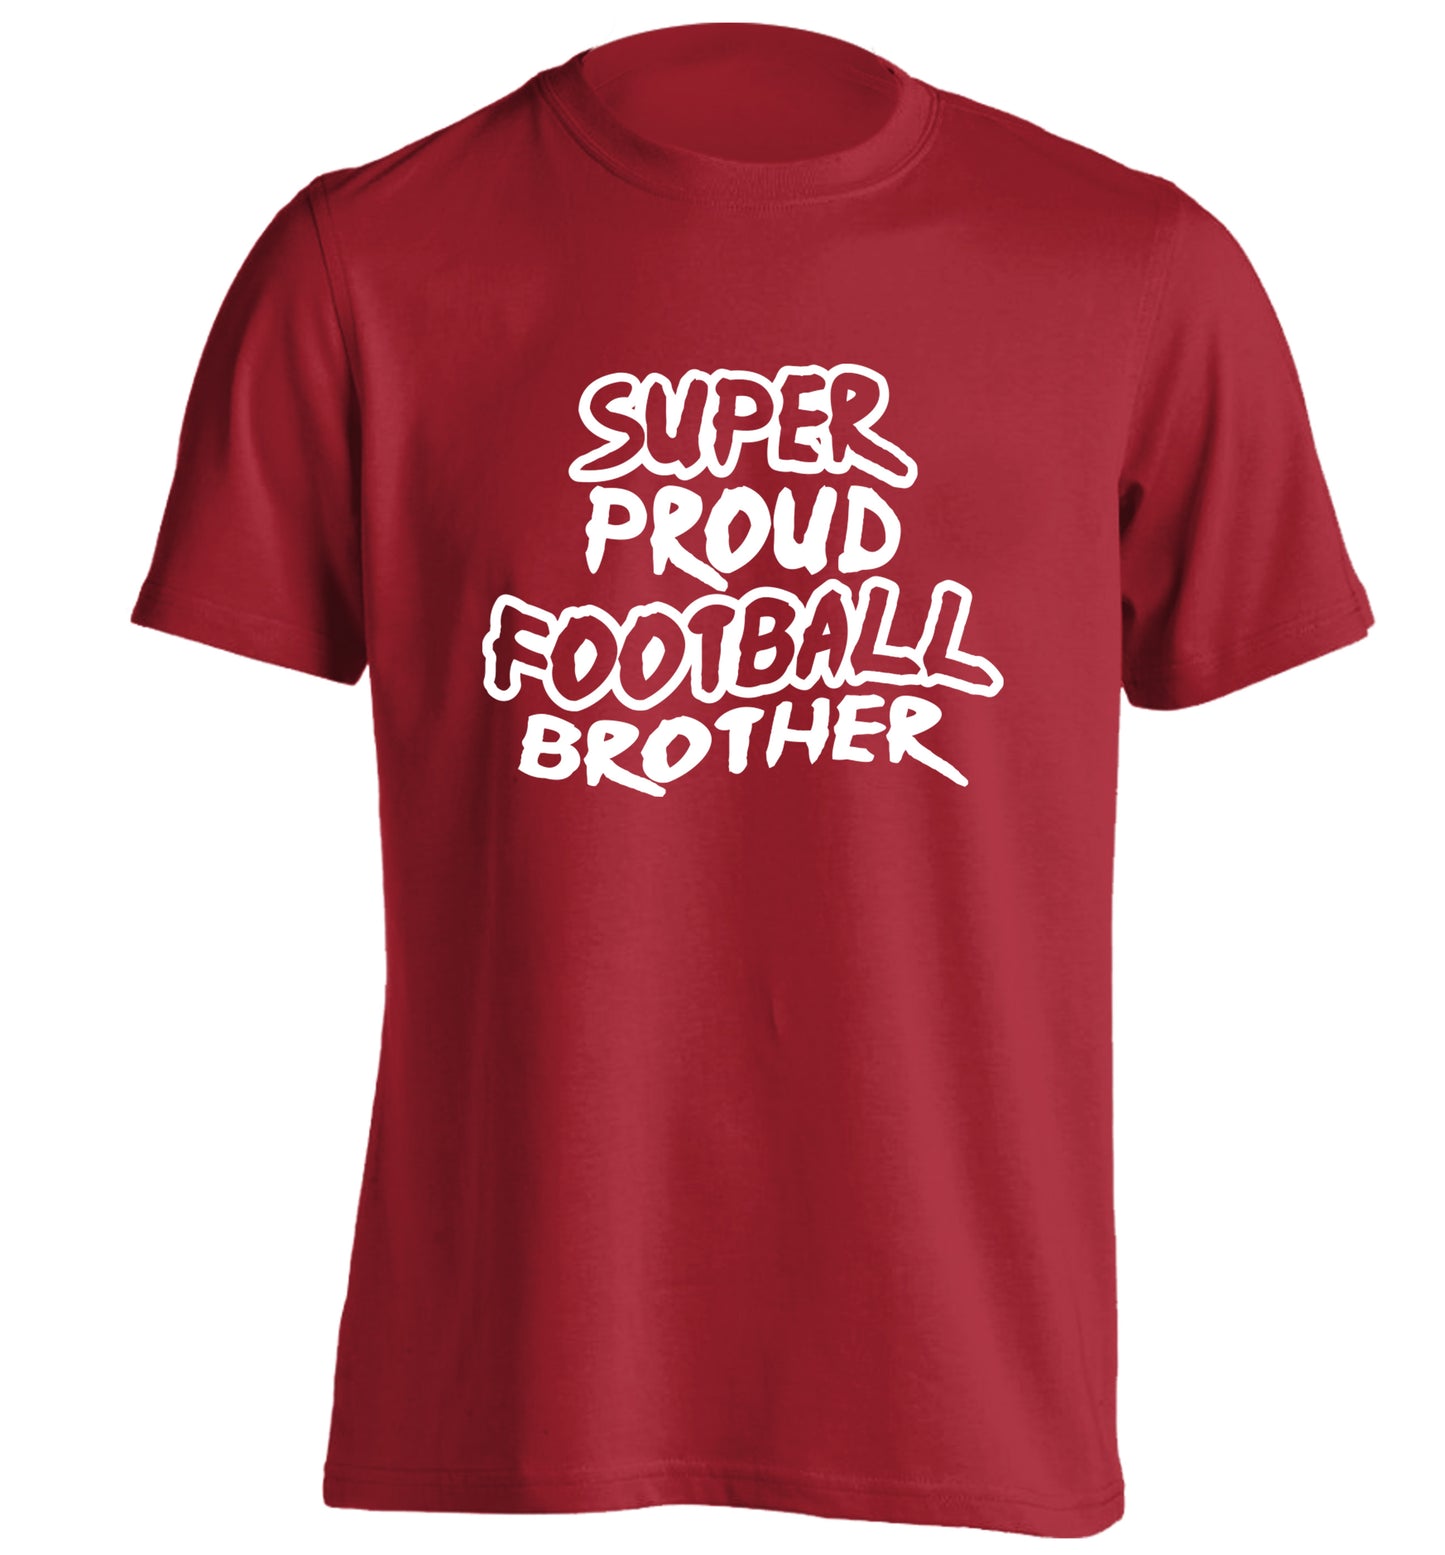 Super proud football brother adults unisexred Tshirt 2XL